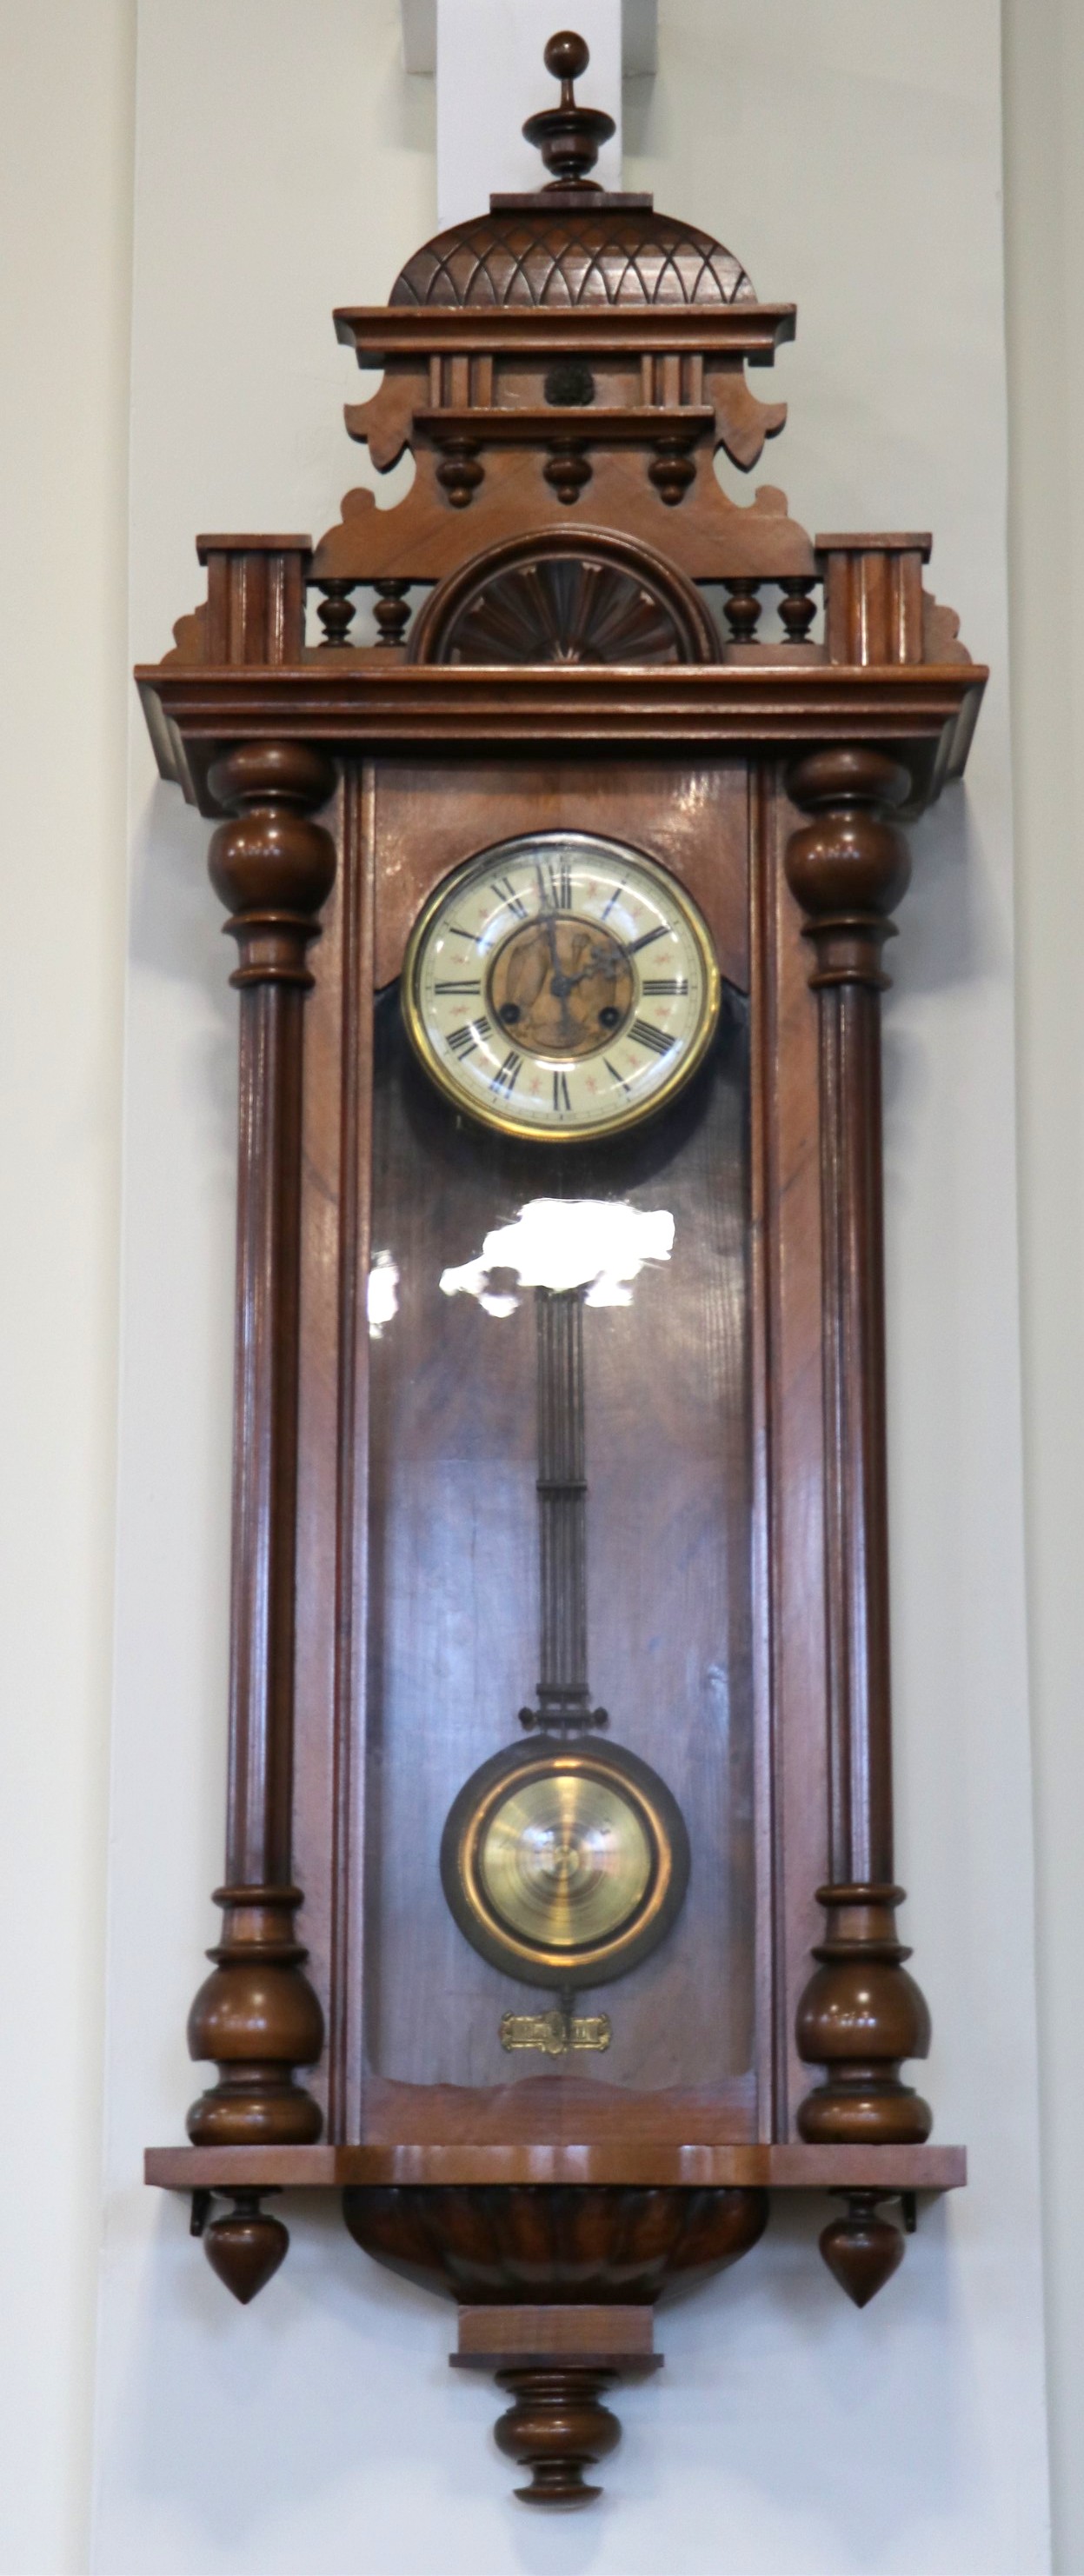 A 1920s walnut Vienna wall clock, having a two train spring movement striking on a gong, 48 x 18 x